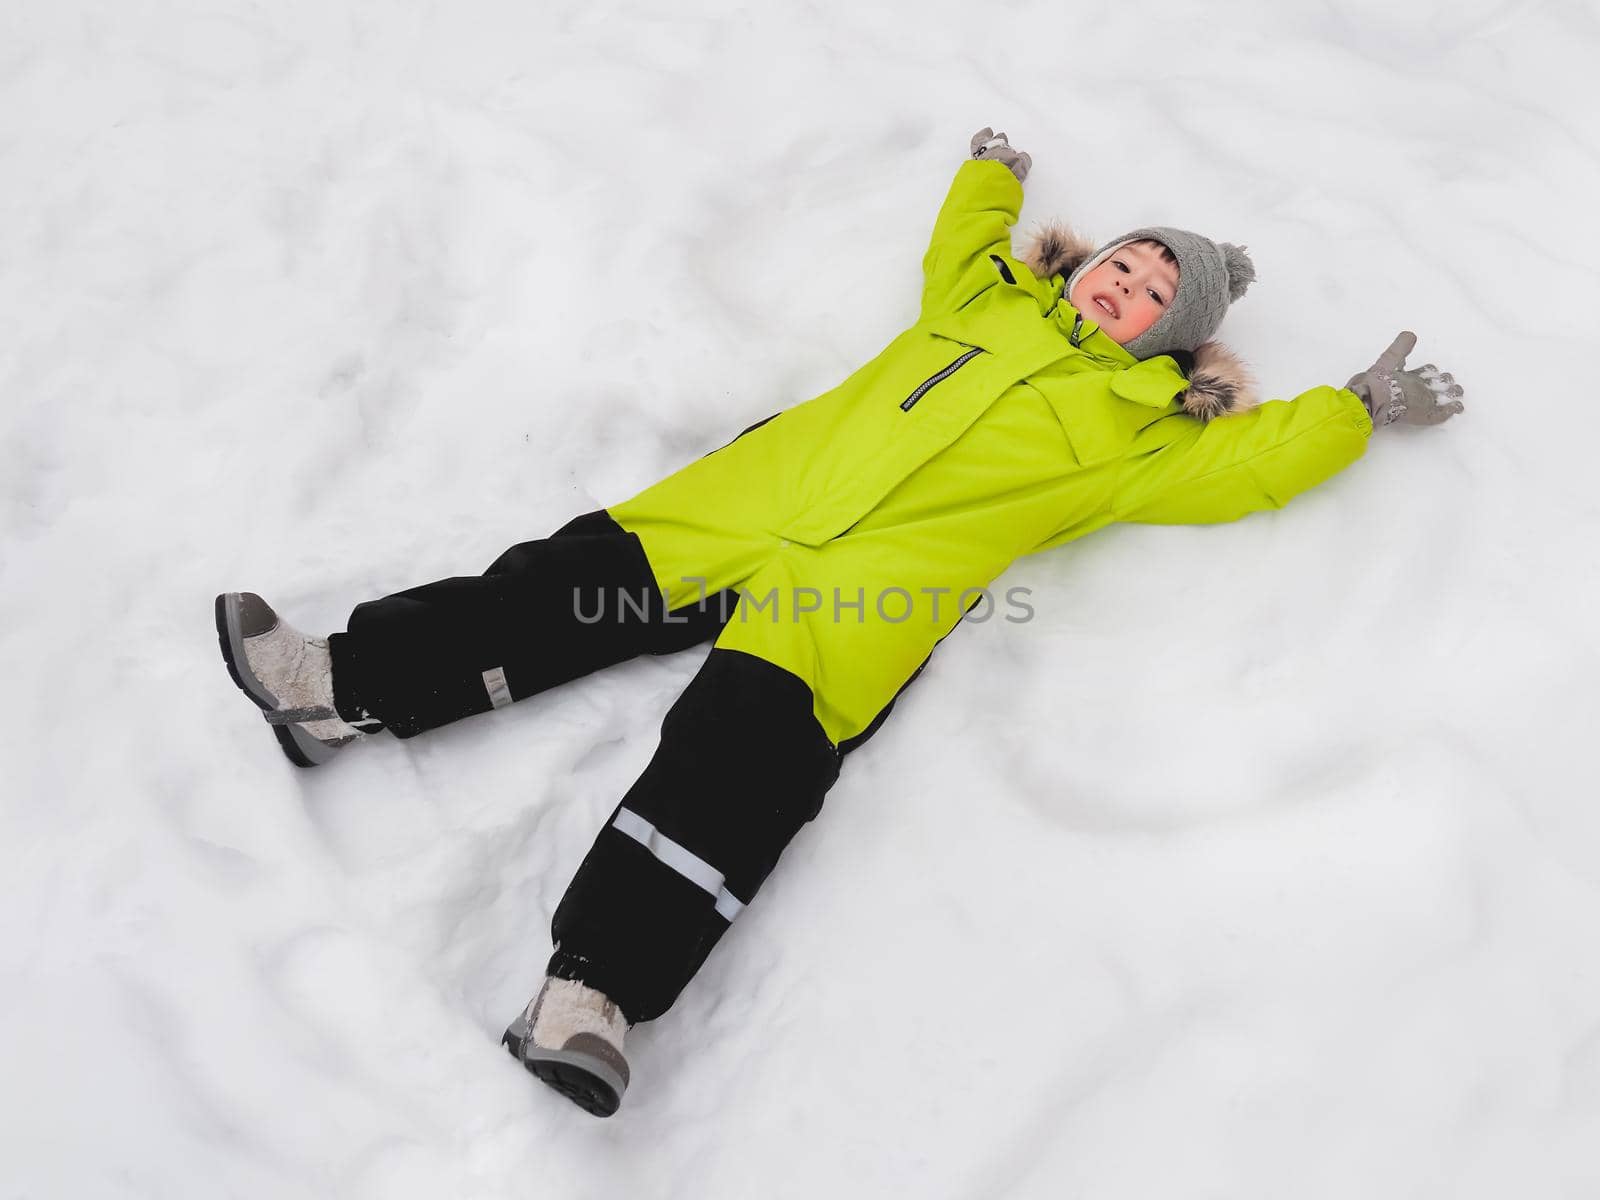 Smiling boy in green jumpsuit is making snow angel shape on snow. Joyful child playing outdoors in snowy weather. Top view on happy kid in colorful overall suit. by aksenovko